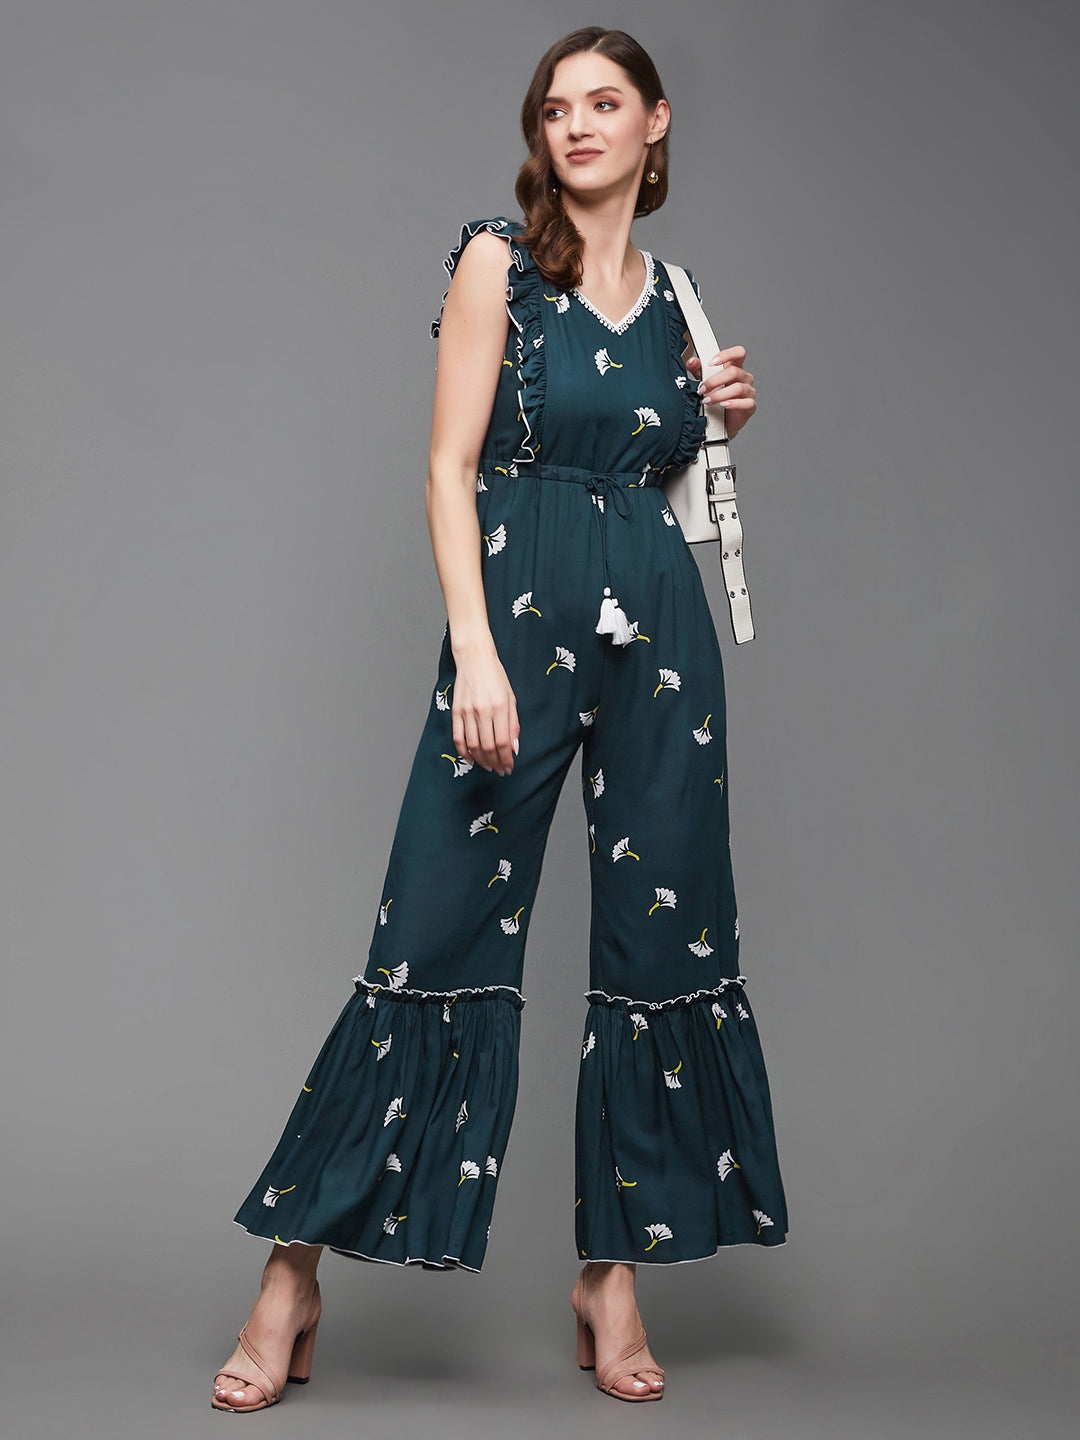 Multicolored-Base-Teal Floral V-Neck Ruffled Sleeves Viscose Rayon Tiered Regular-Length Jumpsuit